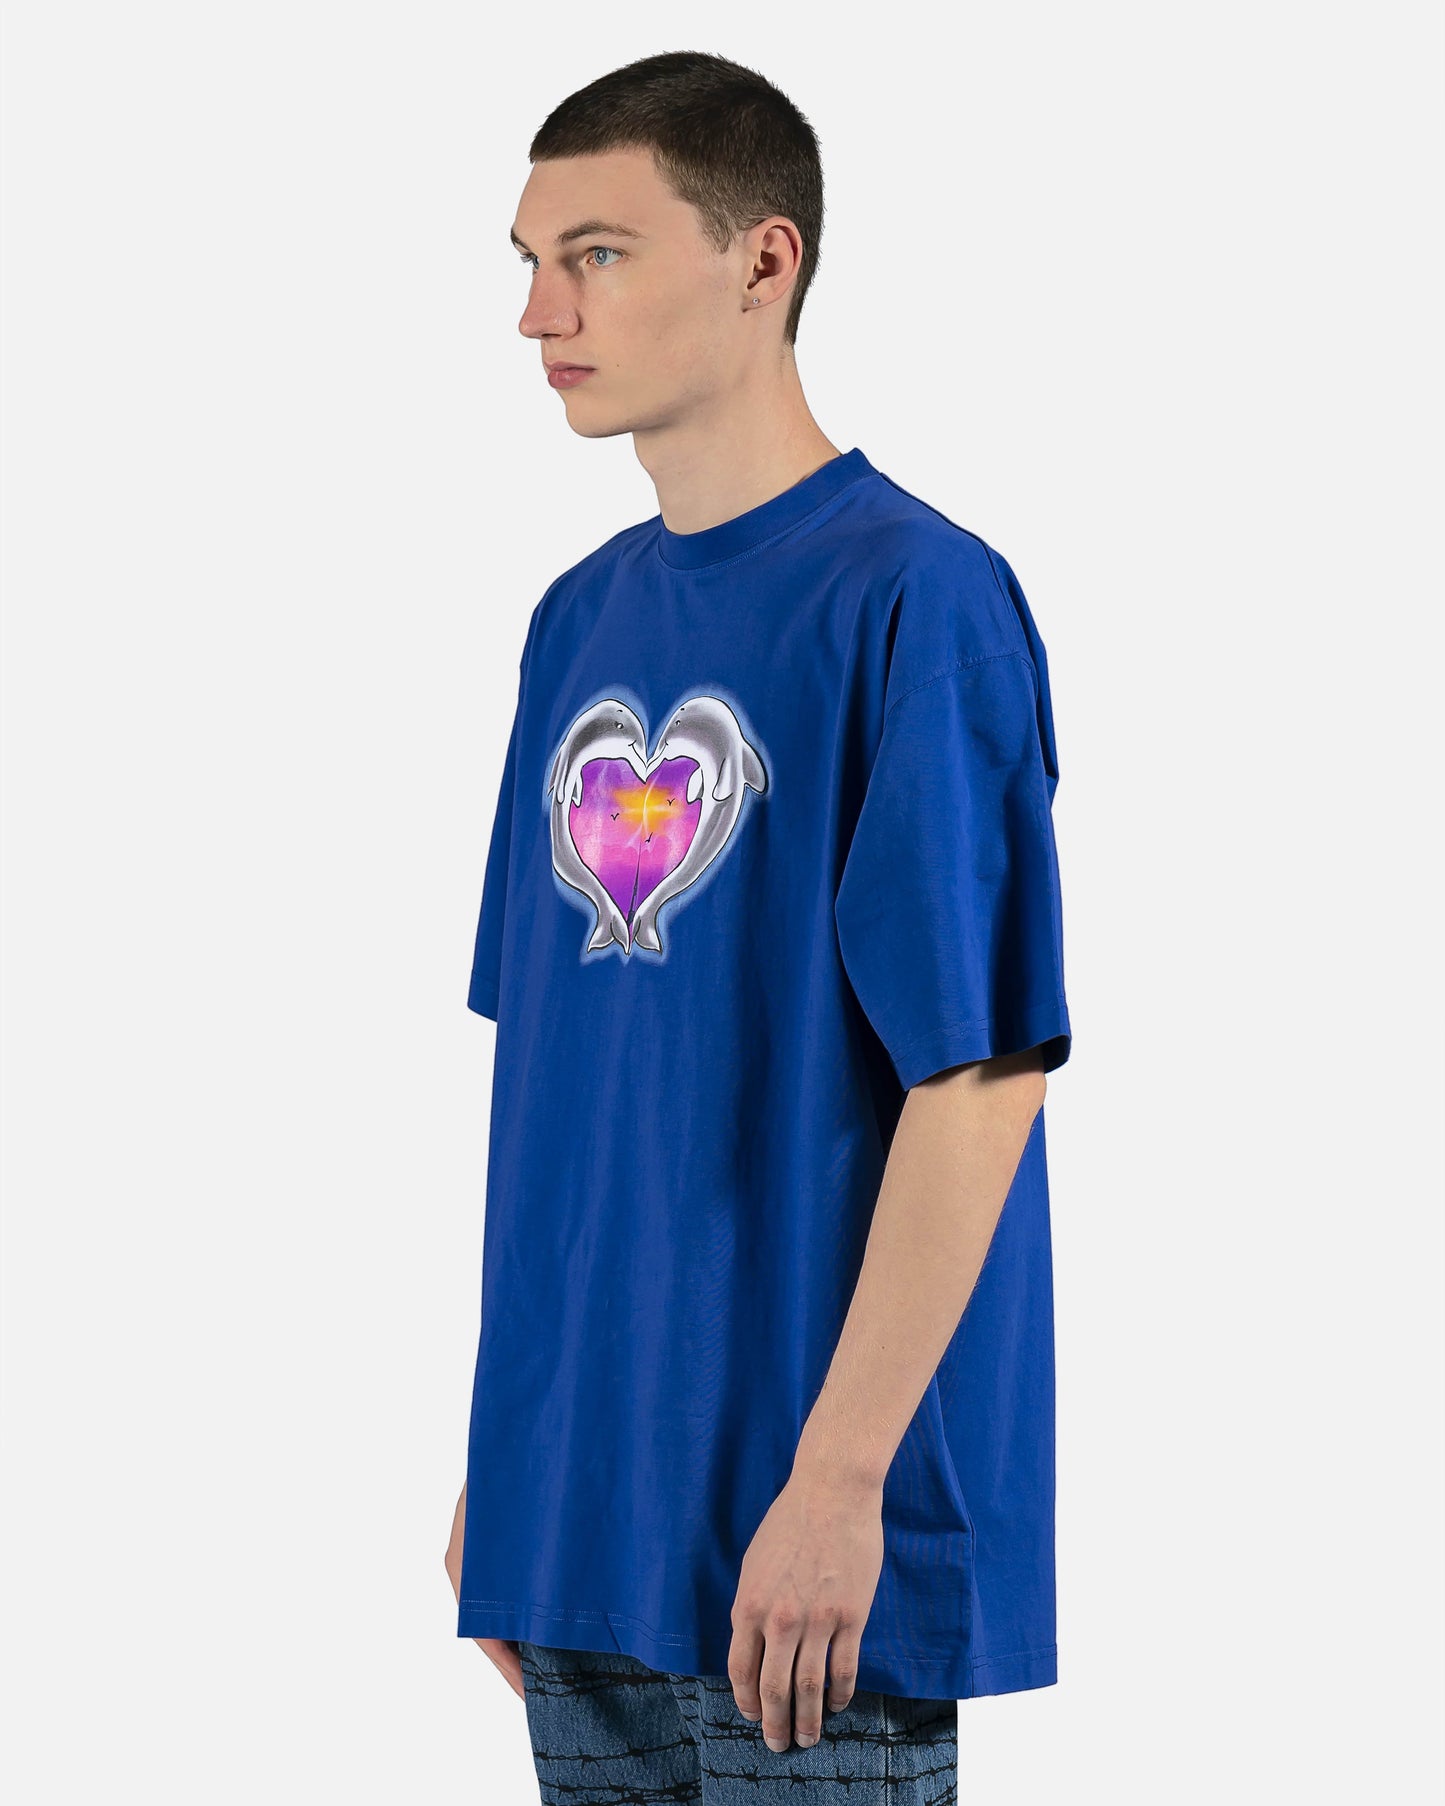 VETEMENTS Men's T-Shirts Dolphins Heart Logo Tee in Blue